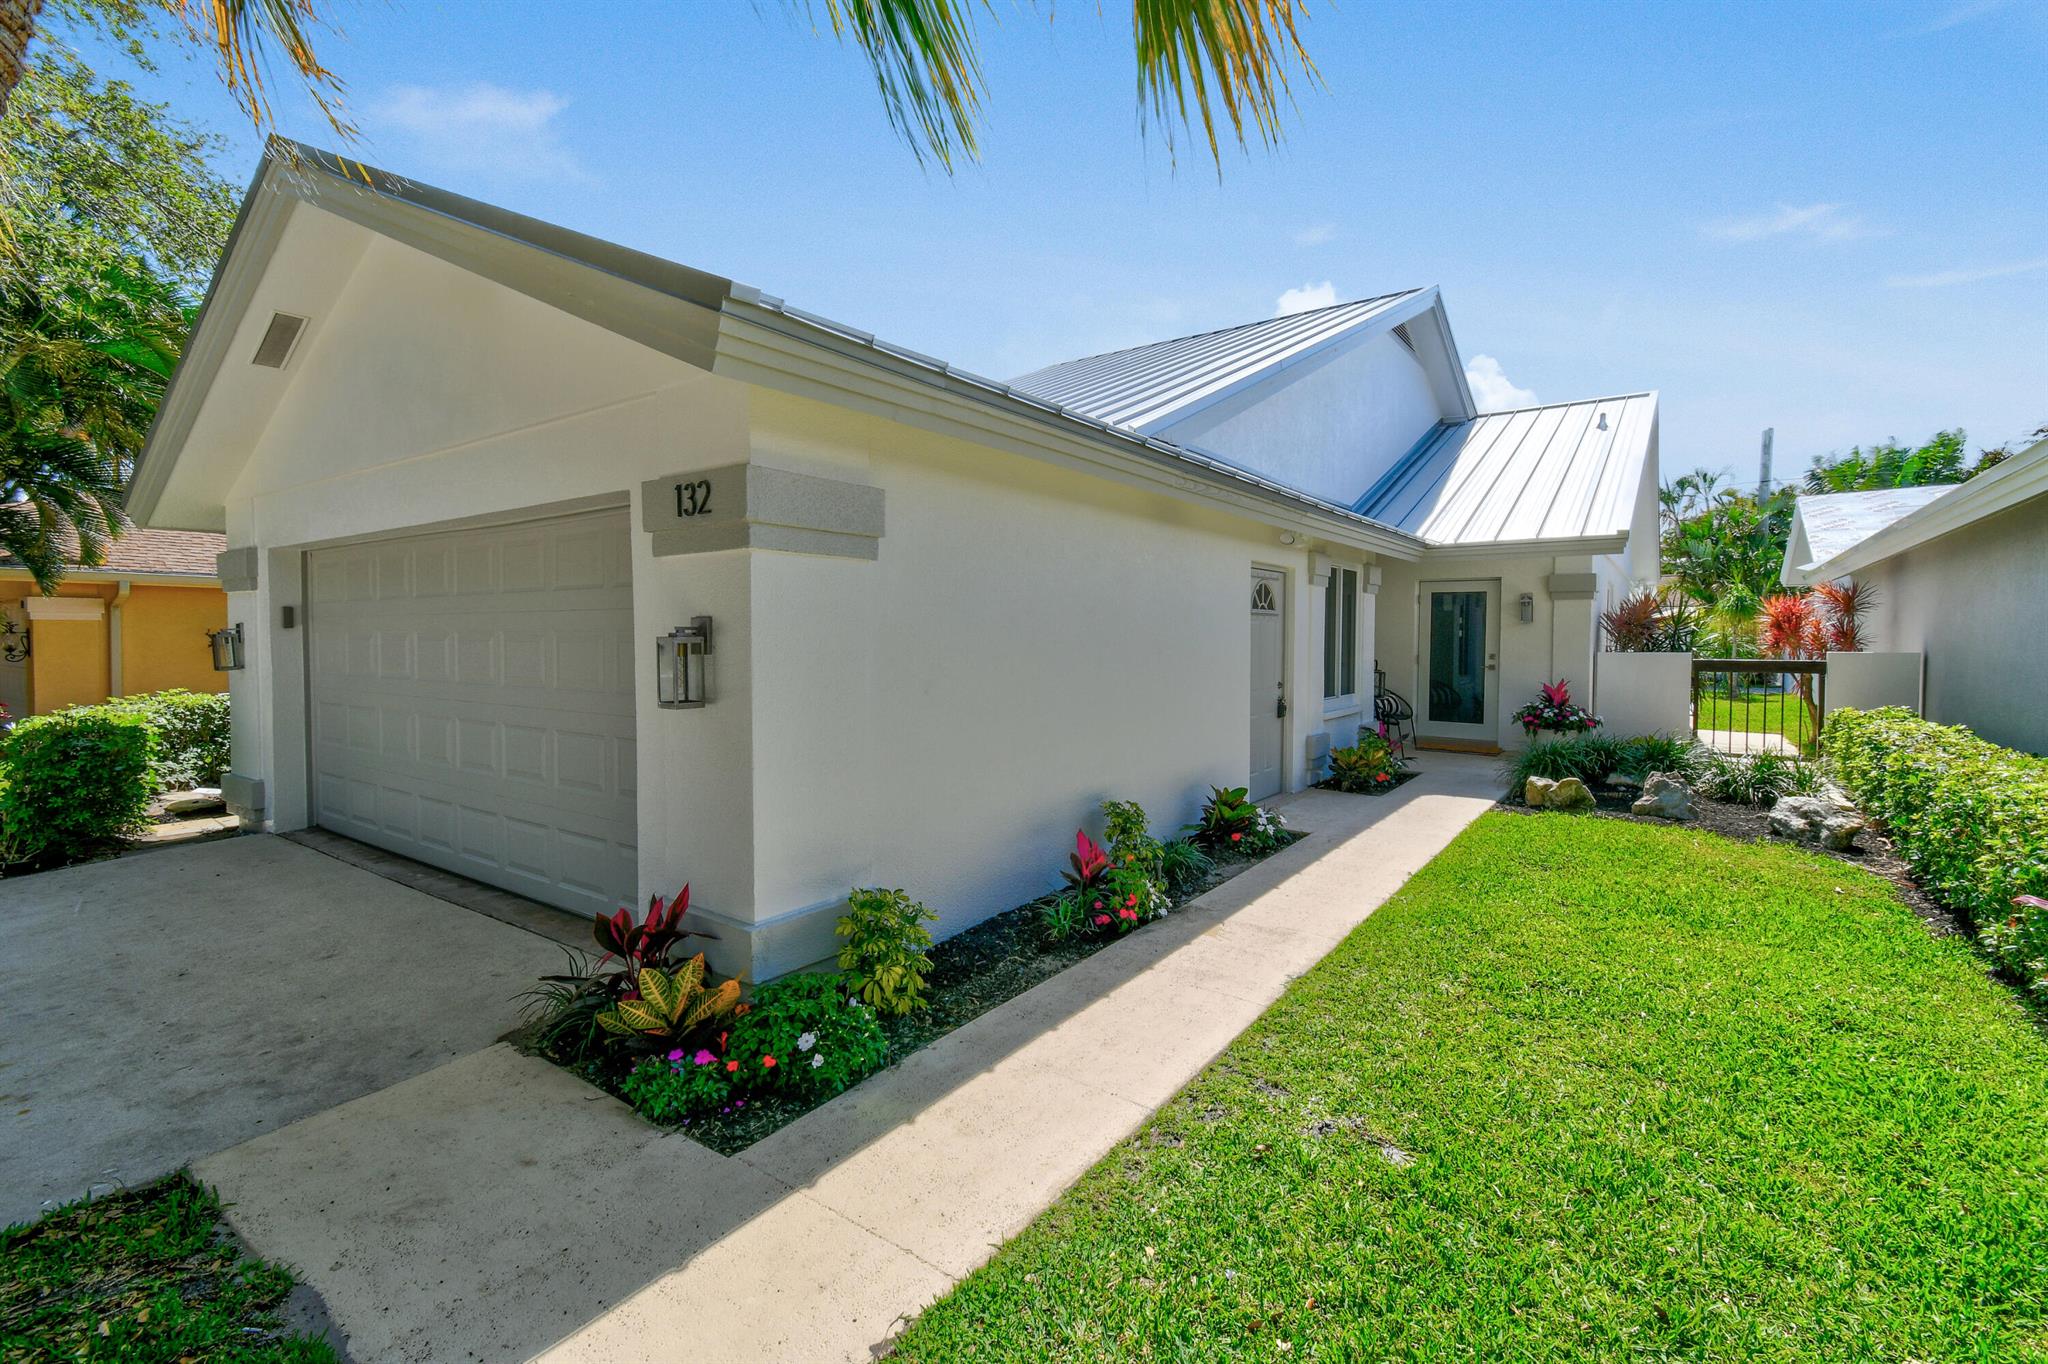 Welcome to Jupiter Beach Paradise! You will fall in love with this completely RENOVATED Bluffs home the moment you arrive. Upgrades include a NEW METAL ROOF, new landscaping, resurfaced renovated pool, All new IMPACT sliders, front door, and windows (garage side door is not impact). The kitchen adorns new stainless appl, white shaker cabinets, and quartz counters, porcelain wood look floor tiles throughout. All bathrooms have been completely renovated. The primary has a free standing tub with separate shower and marble flooring.The home has been painted inside/and out with new 6'' baseboards, new shaker doors and smooth  ceilings. You will also find all new light fixtures, fans, and washer/dryer. Walking distance to the Jupiter/Juno Beach, restaurants